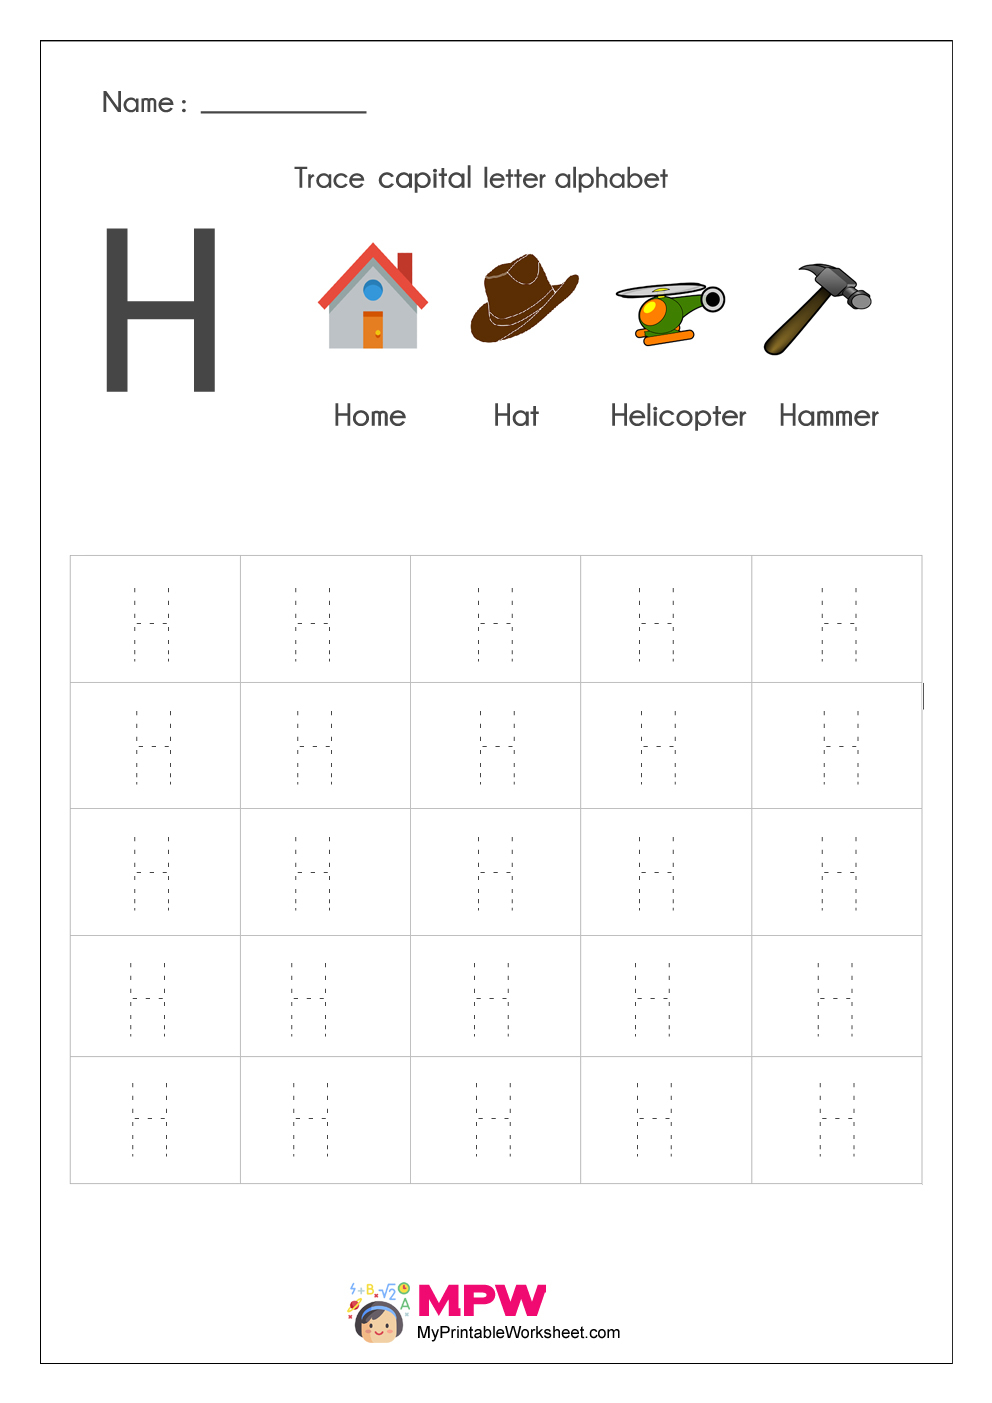 Alphabet Tracing Worksheets, Printable English Capital with Alphabet Tracing Letter H